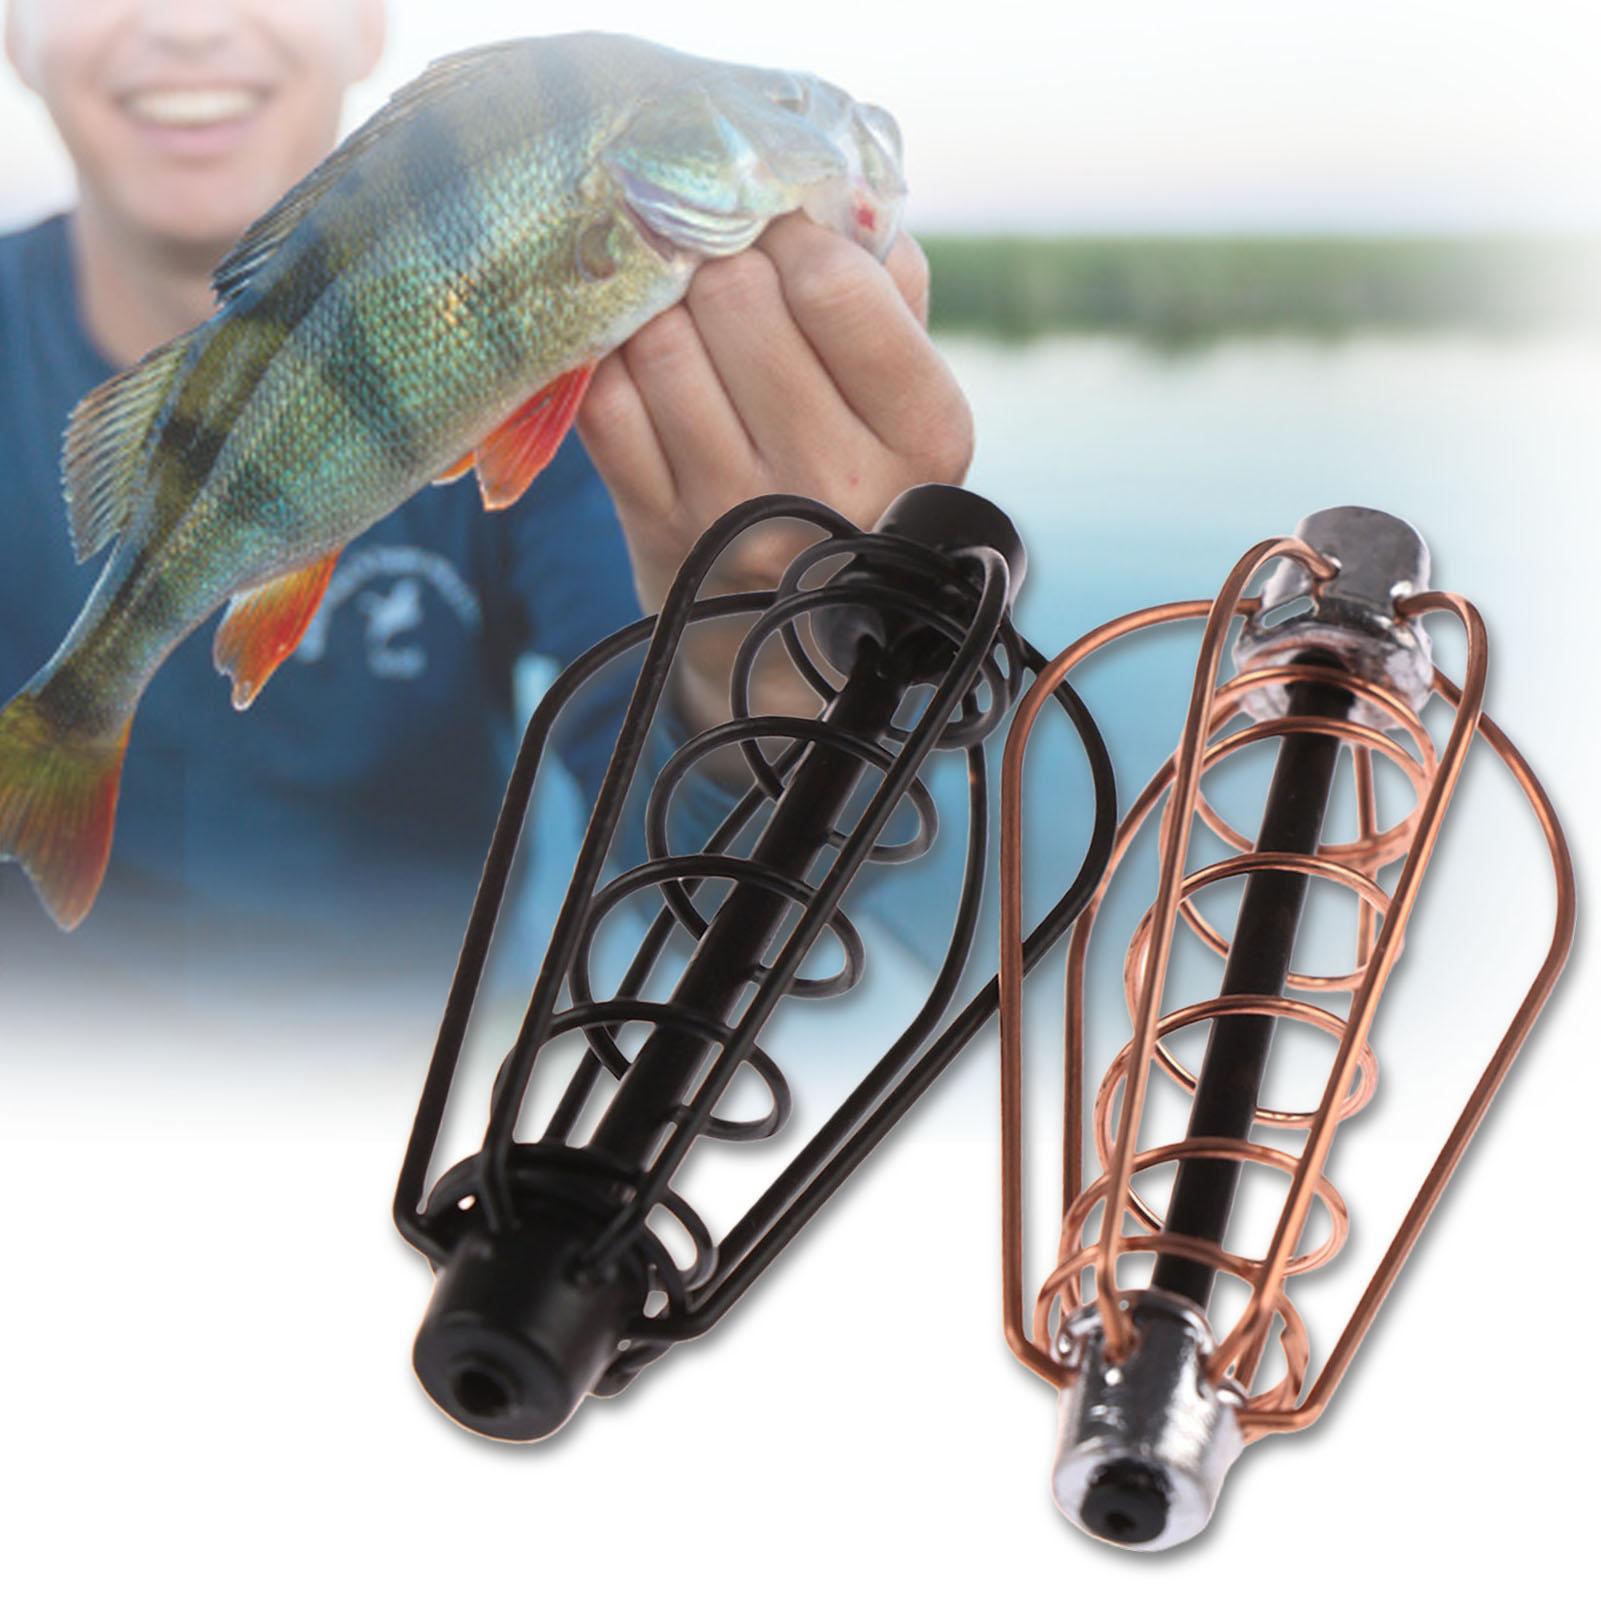 15g/20g/25g/30g Bait Cage Connector Feeder Holder Thrower Carp Fishing Accessory